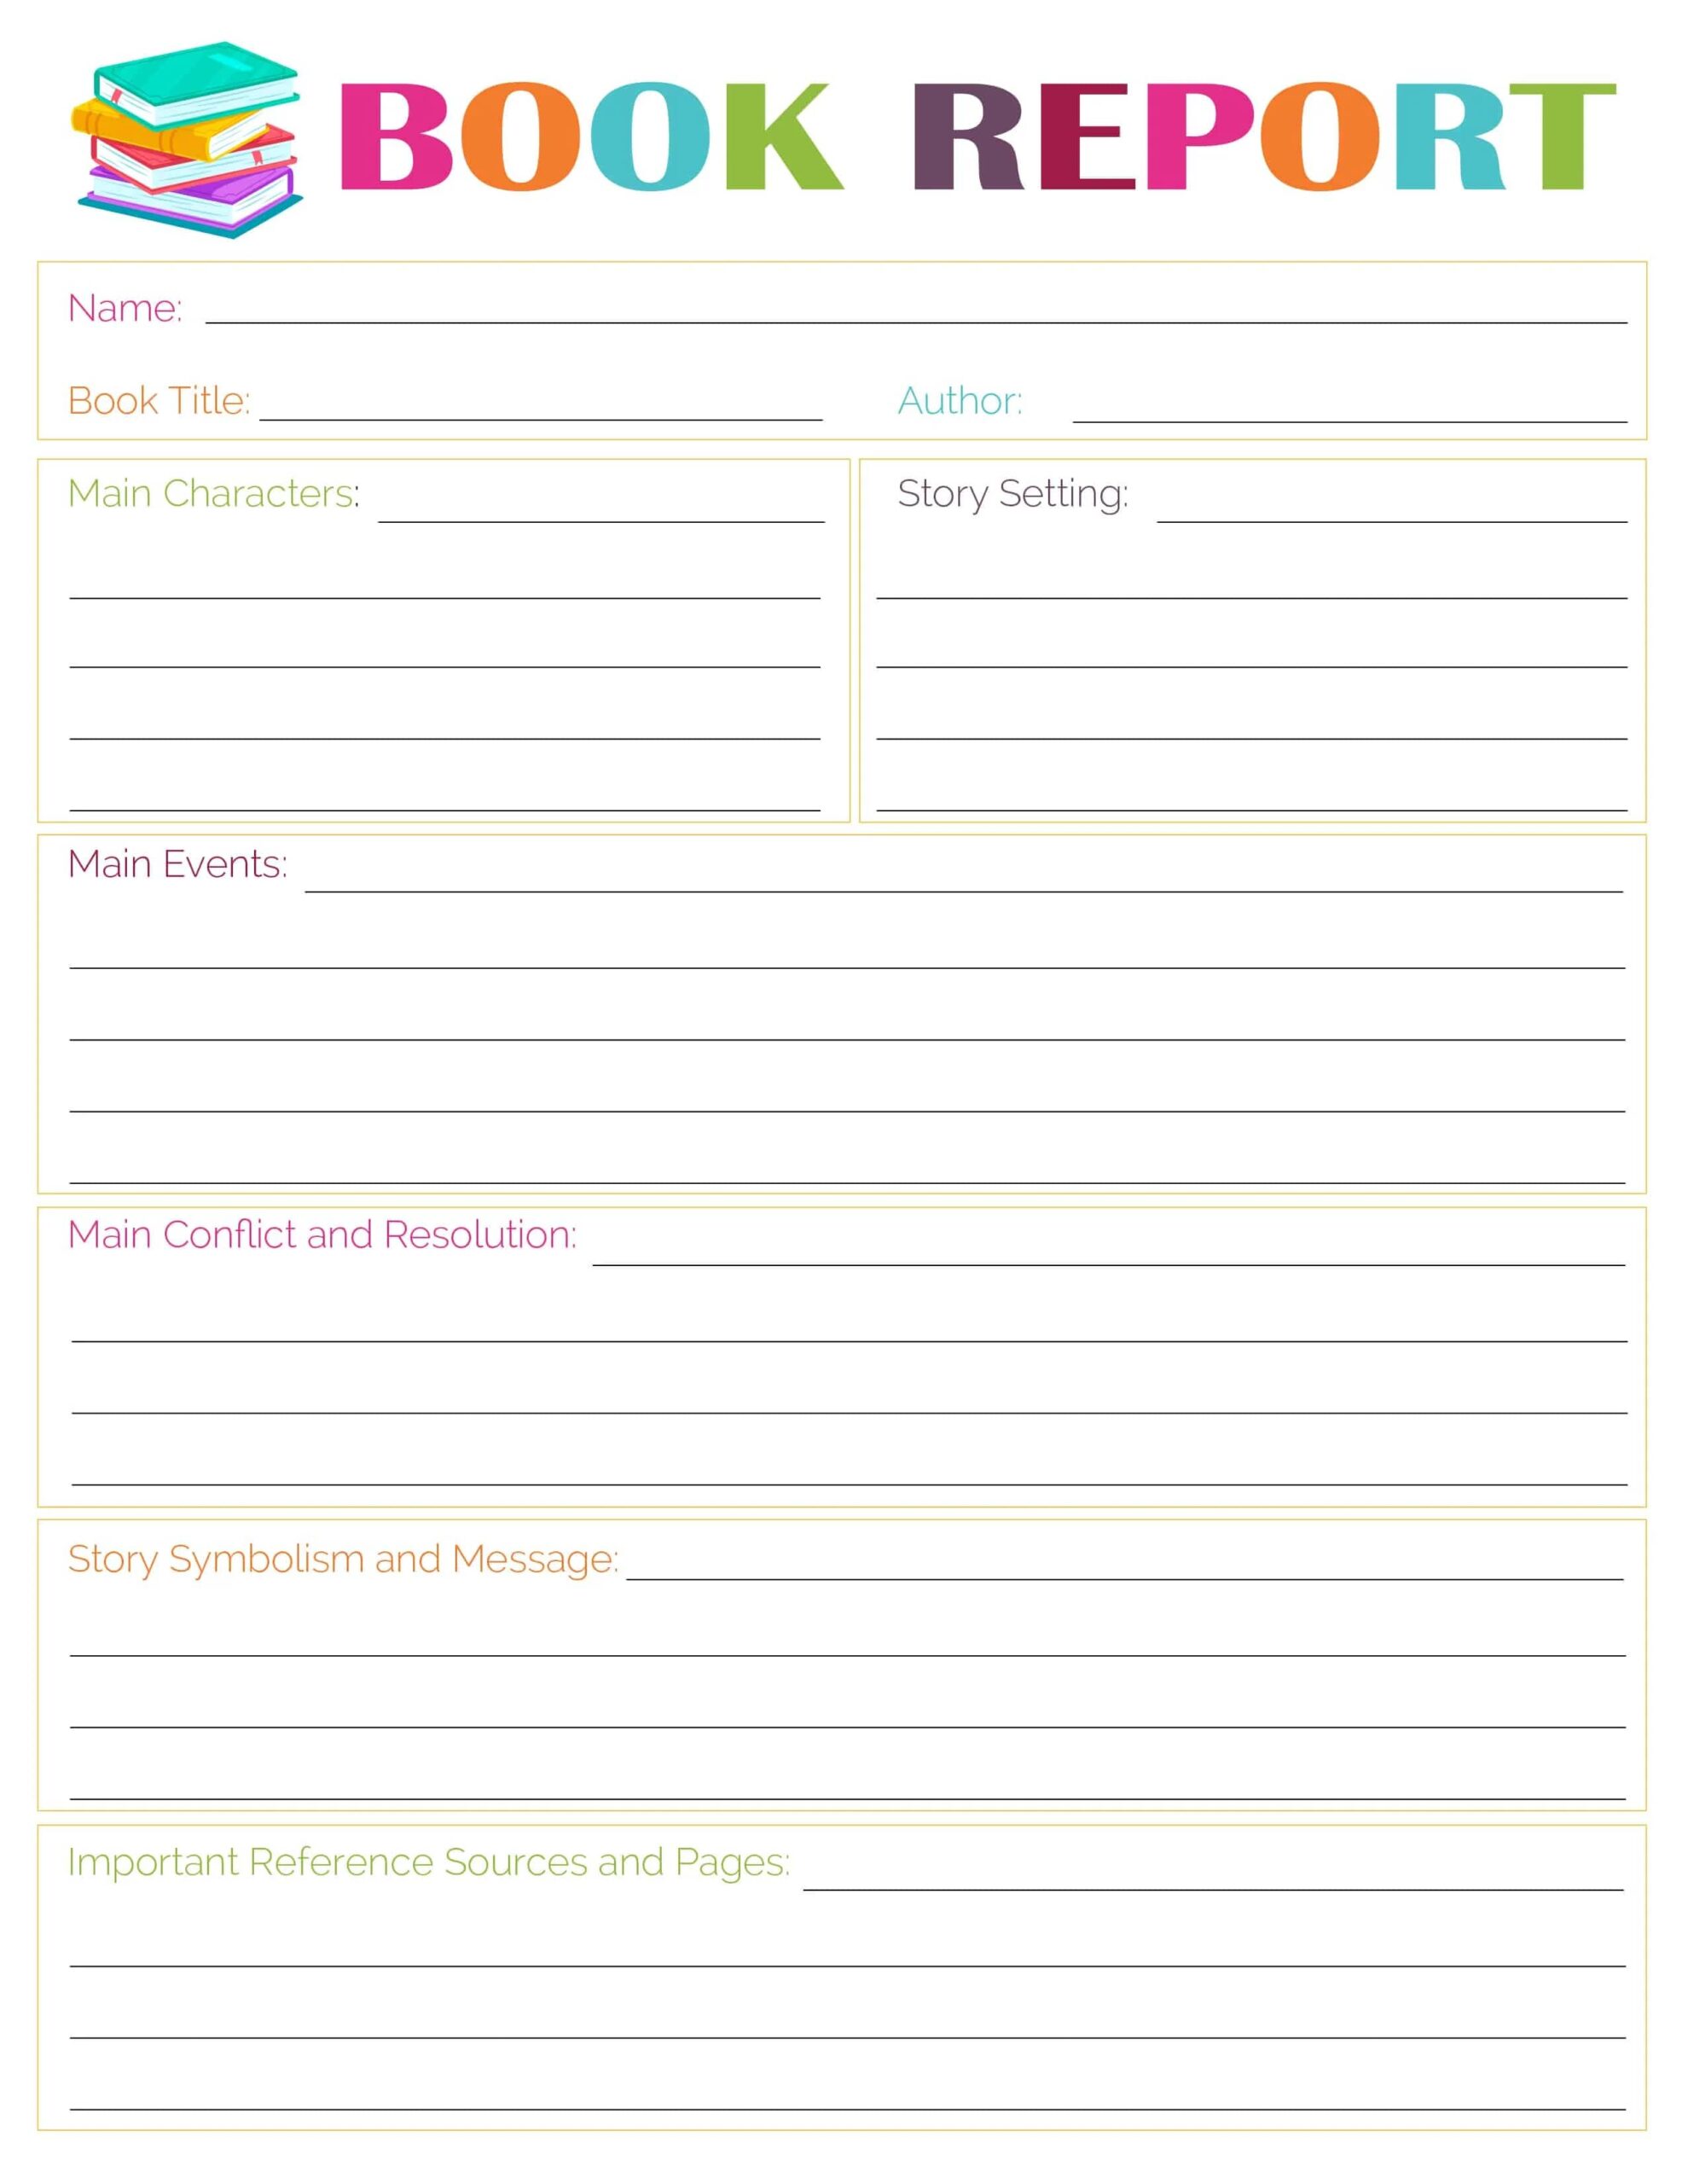 Printable Book Report Forms_63221